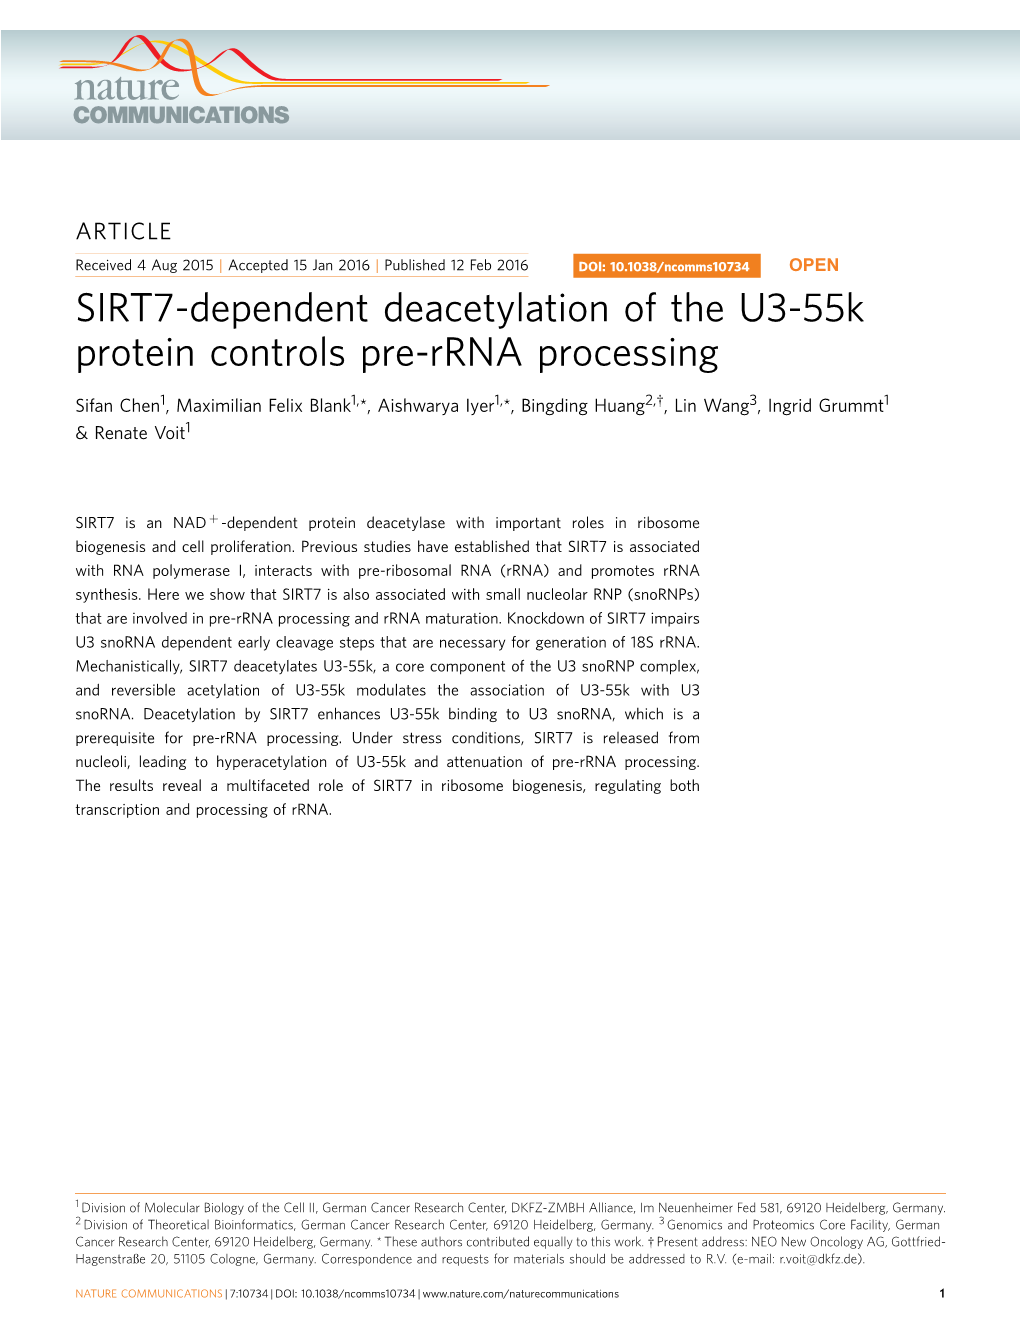 SIRT7-Dependent Deacetylation of the U3-55K Protein Controls Pre-Rrna Processing